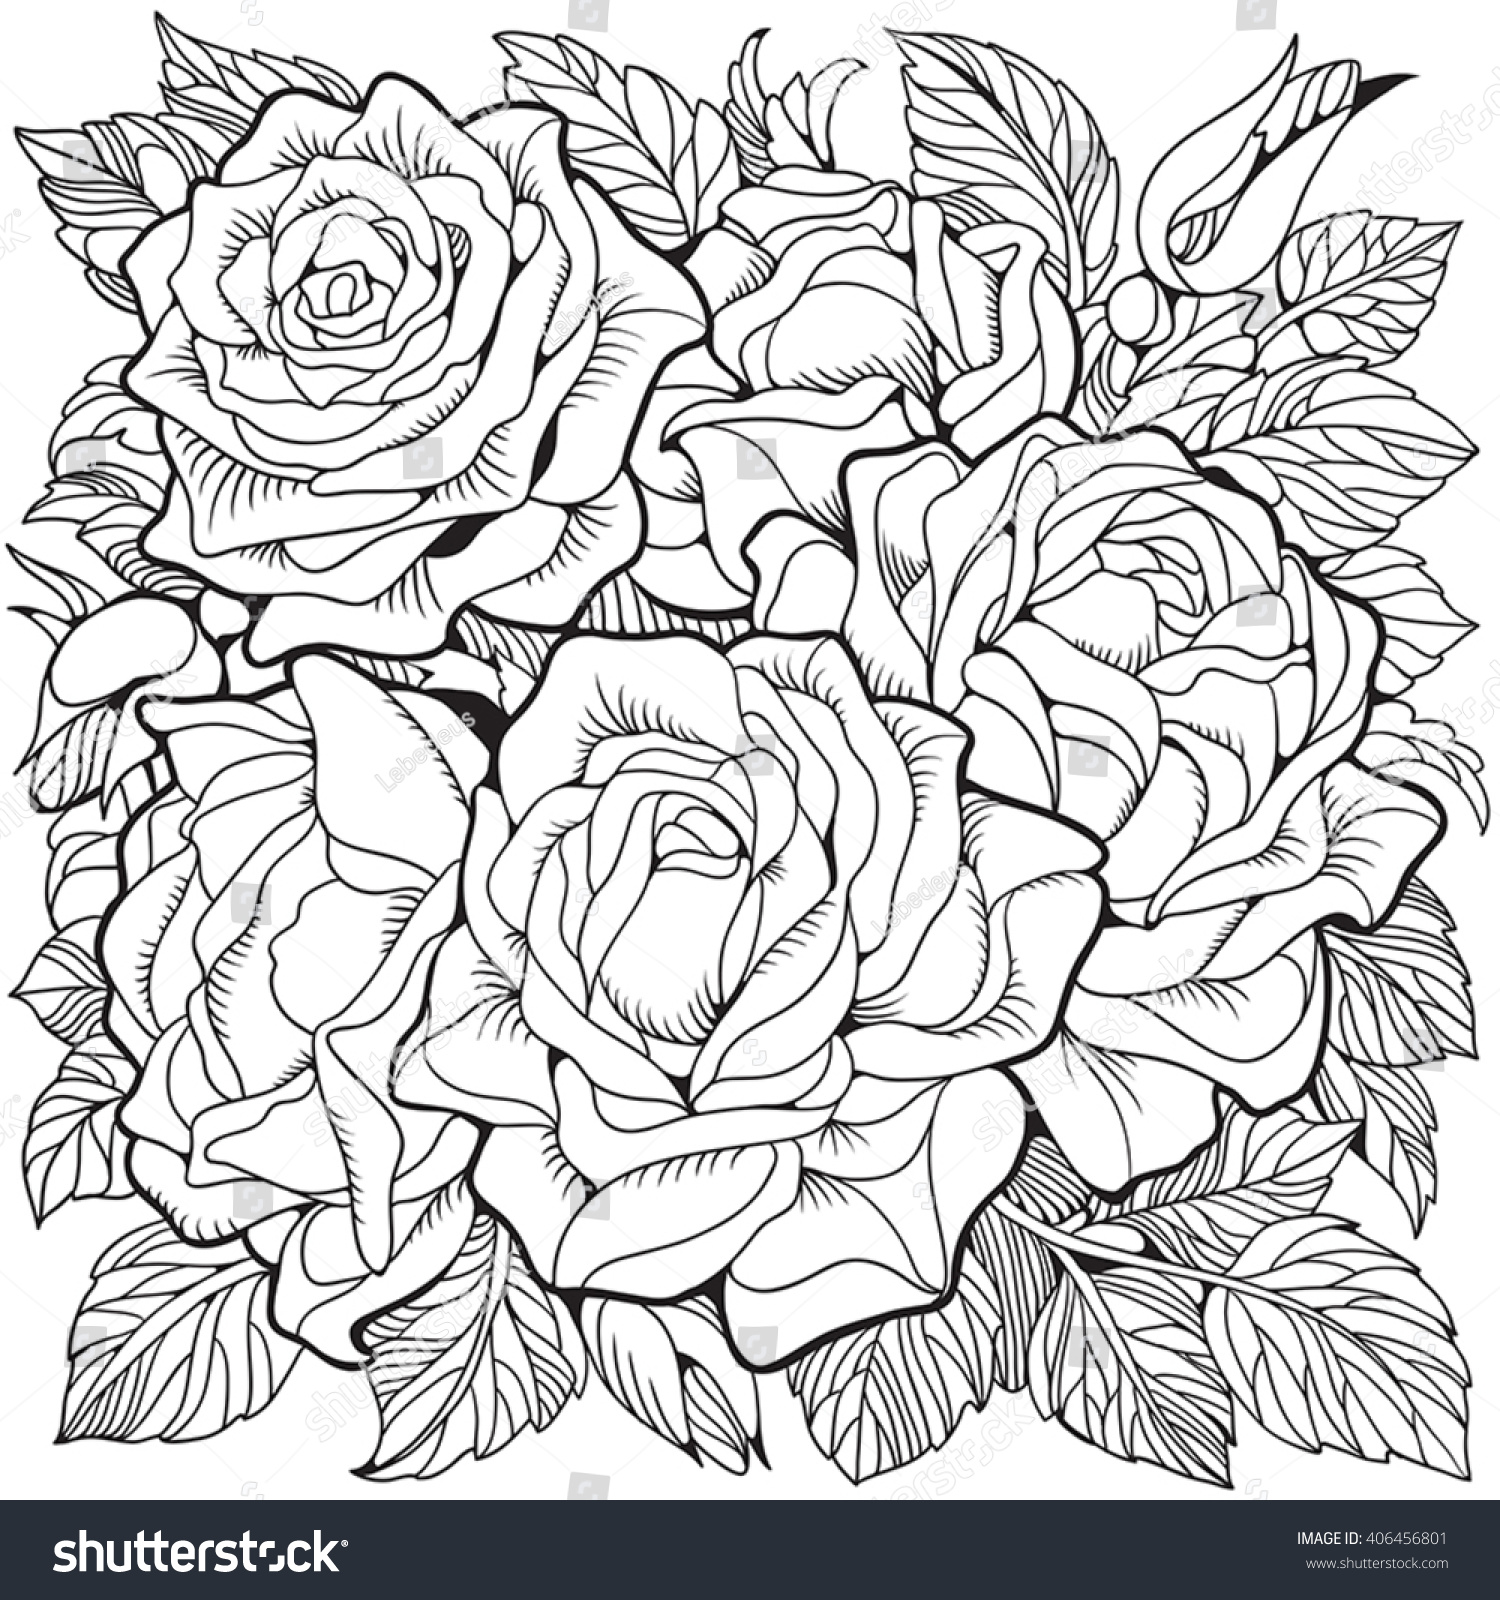 Coloring Page Roses Stock Vector (Royalty Free) 406456801 | Shutterstock